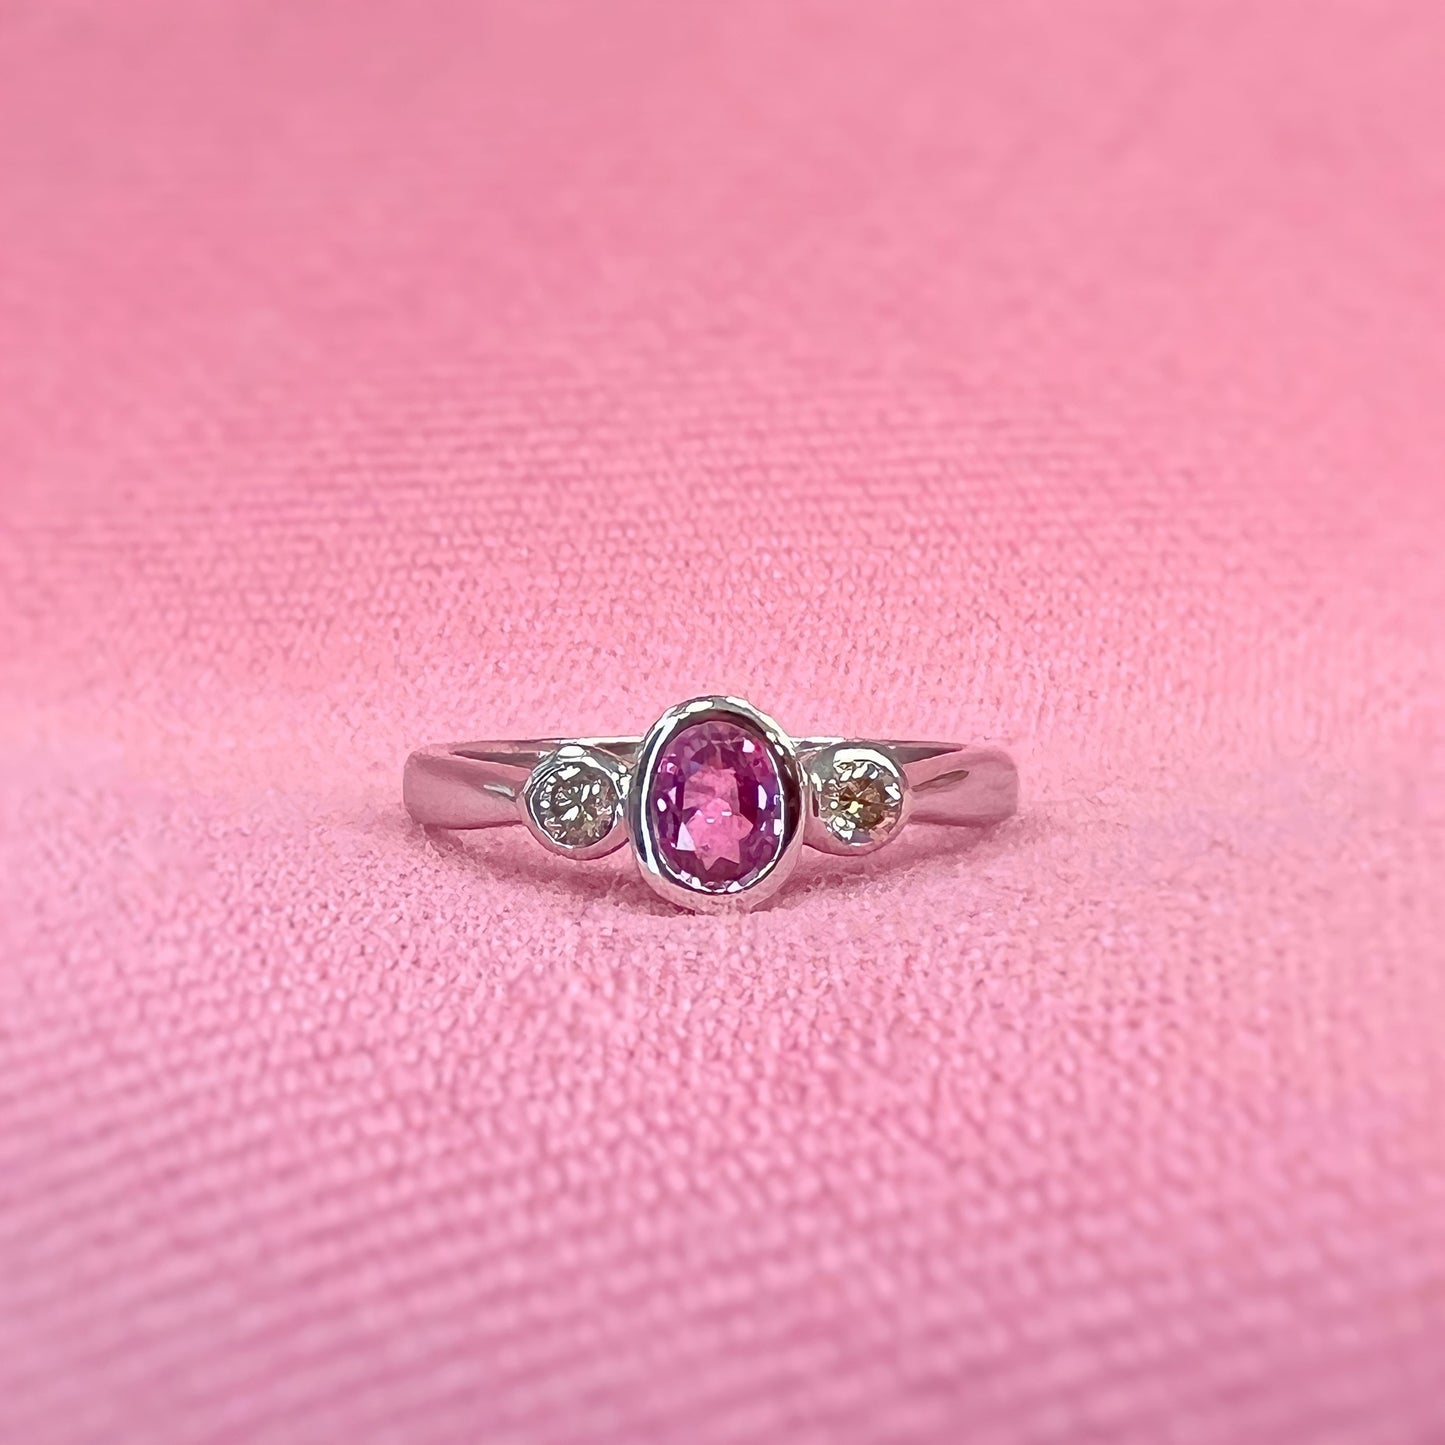 18ct White Gold Pink Sapphire and Diamond Trilogy Ring - SIZE M